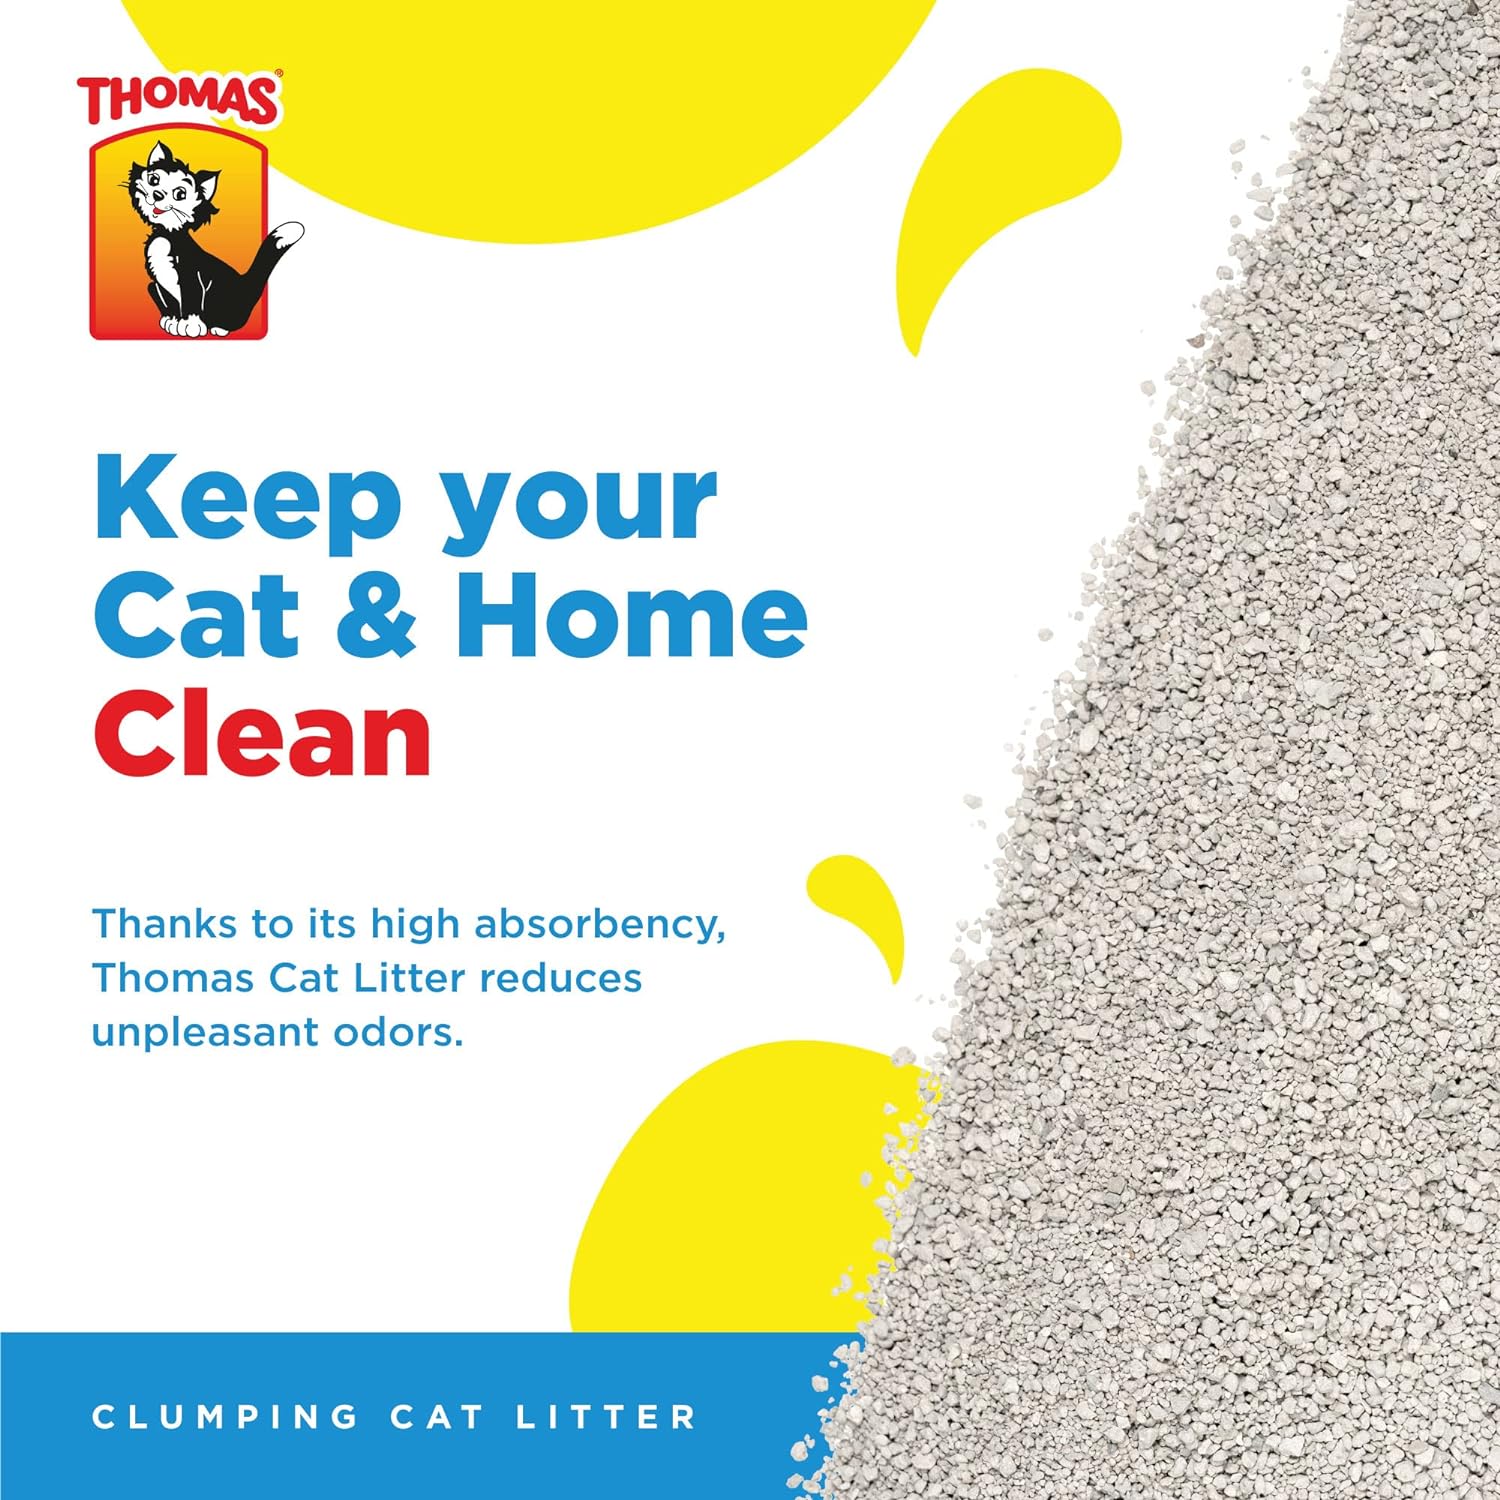 Thomas Cat Litter, Natural Minerals Litter Sand, it's Clumping and Highly Absorbent Nature Ensures Your Cat to Come Back to its Cat Litter Box with Comfort, Bag of 5kg